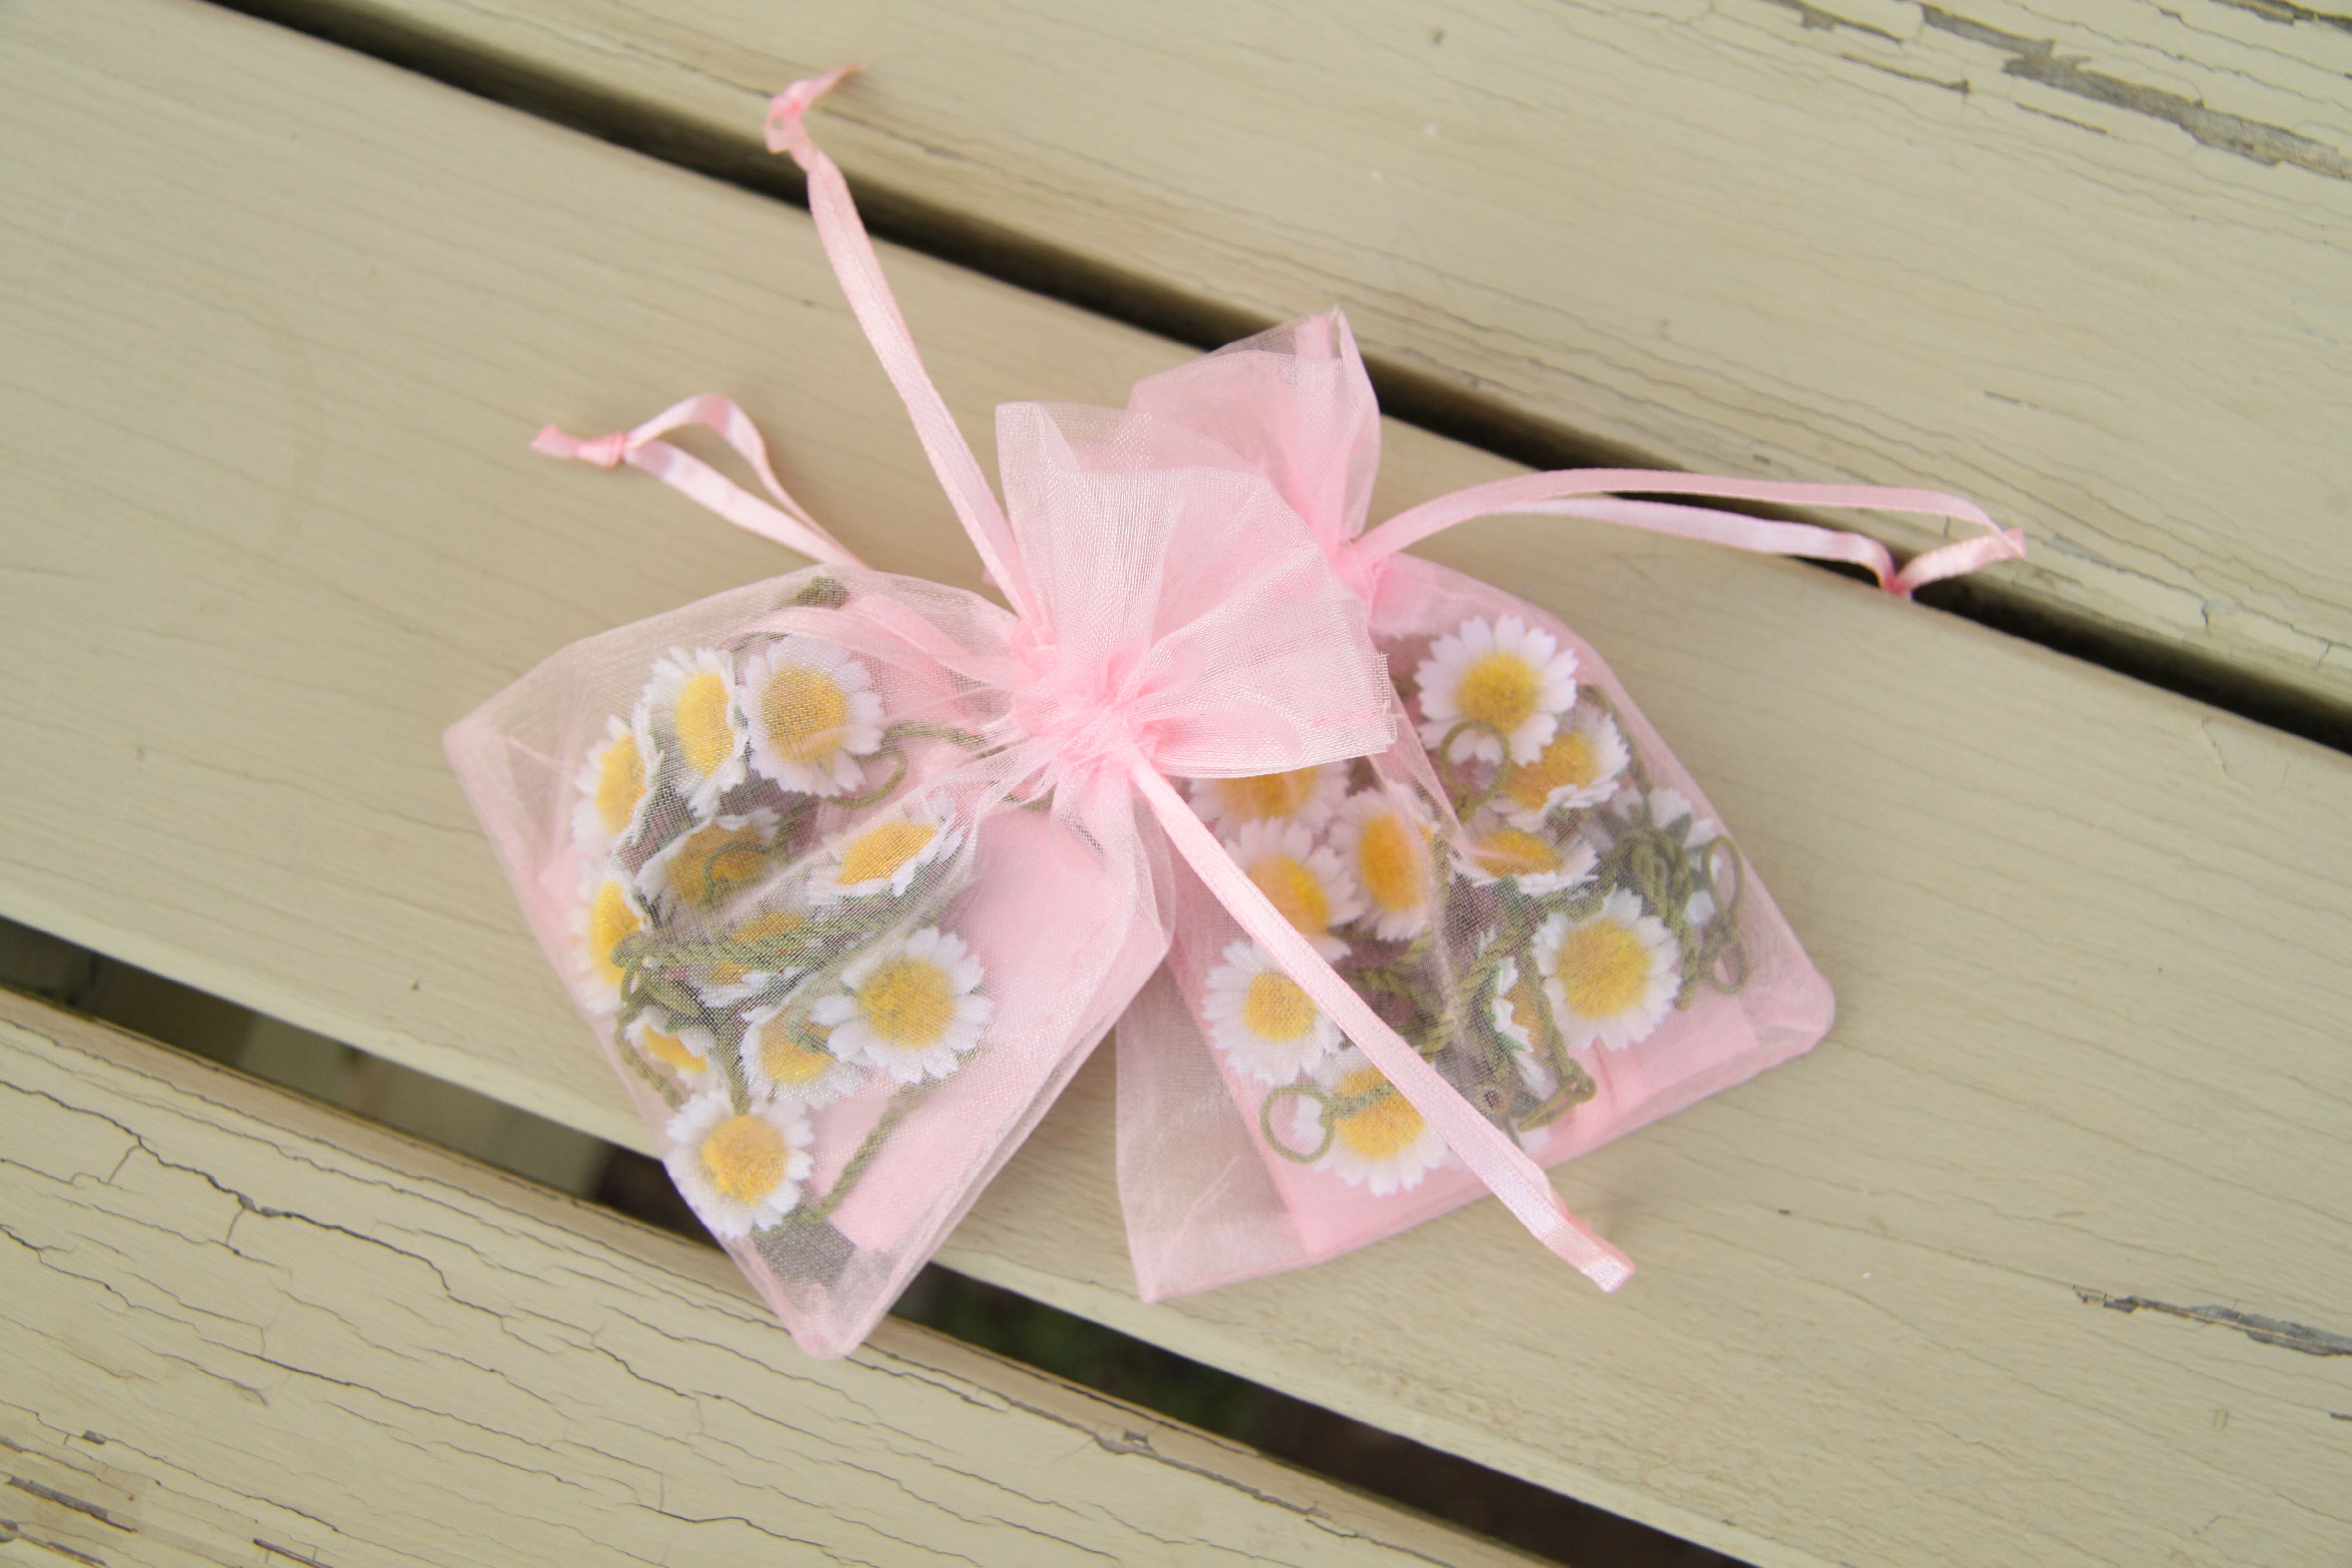 Silk Daisy Chains - lovely stocking fillers